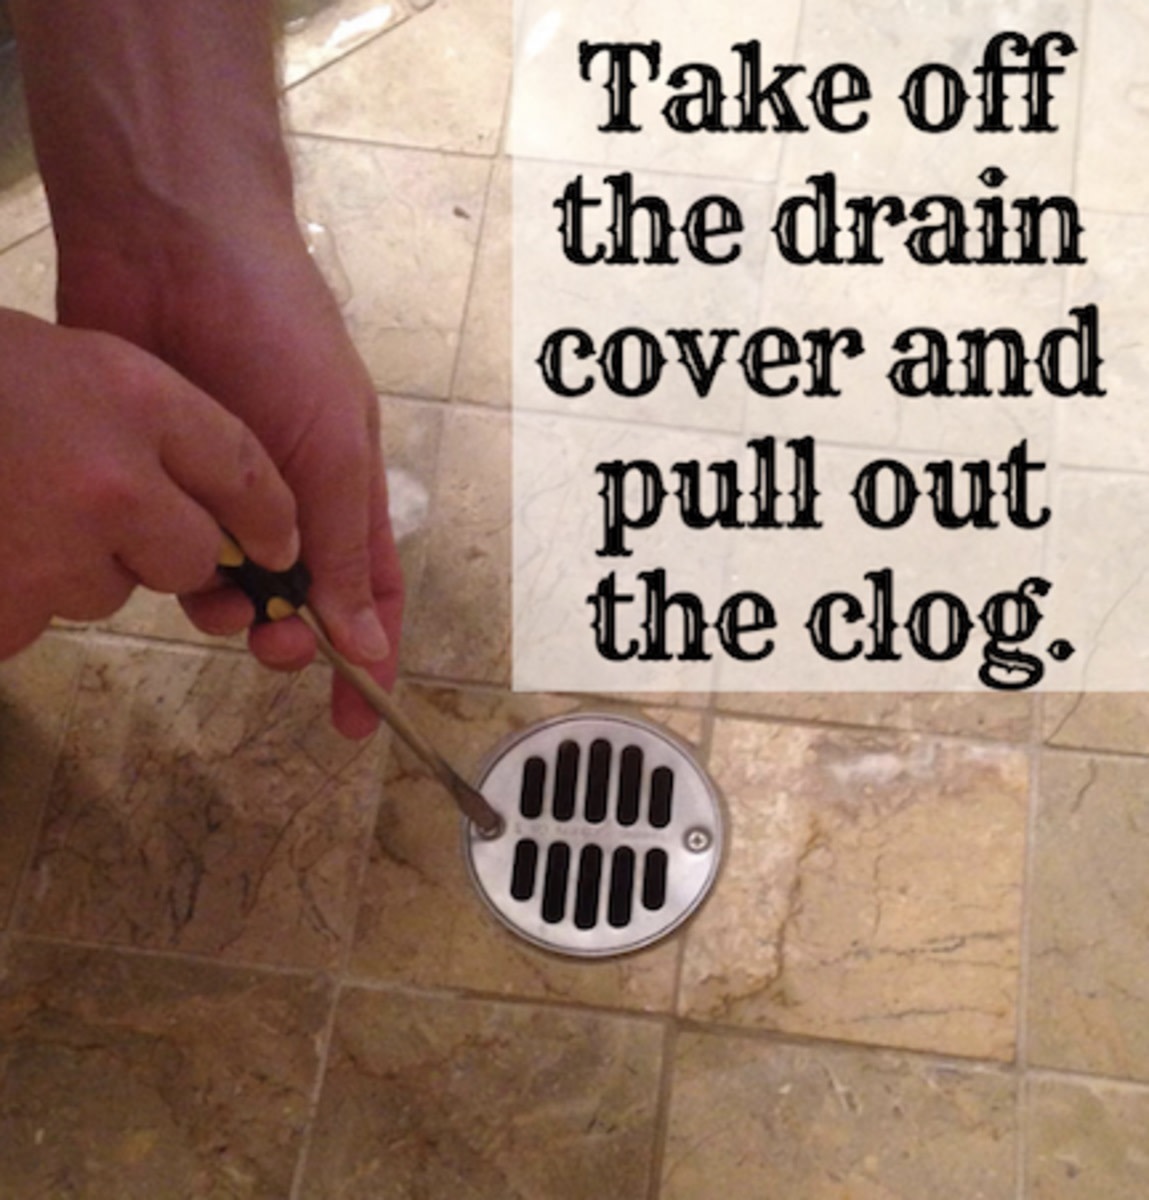 https://images.saymedia-content.com/.image/t_share/MjAxNDQ0MTY4ODc3MjIxNDI5/how-to-clear-a-clogged-shower-drain-8-methods-to-try.jpg